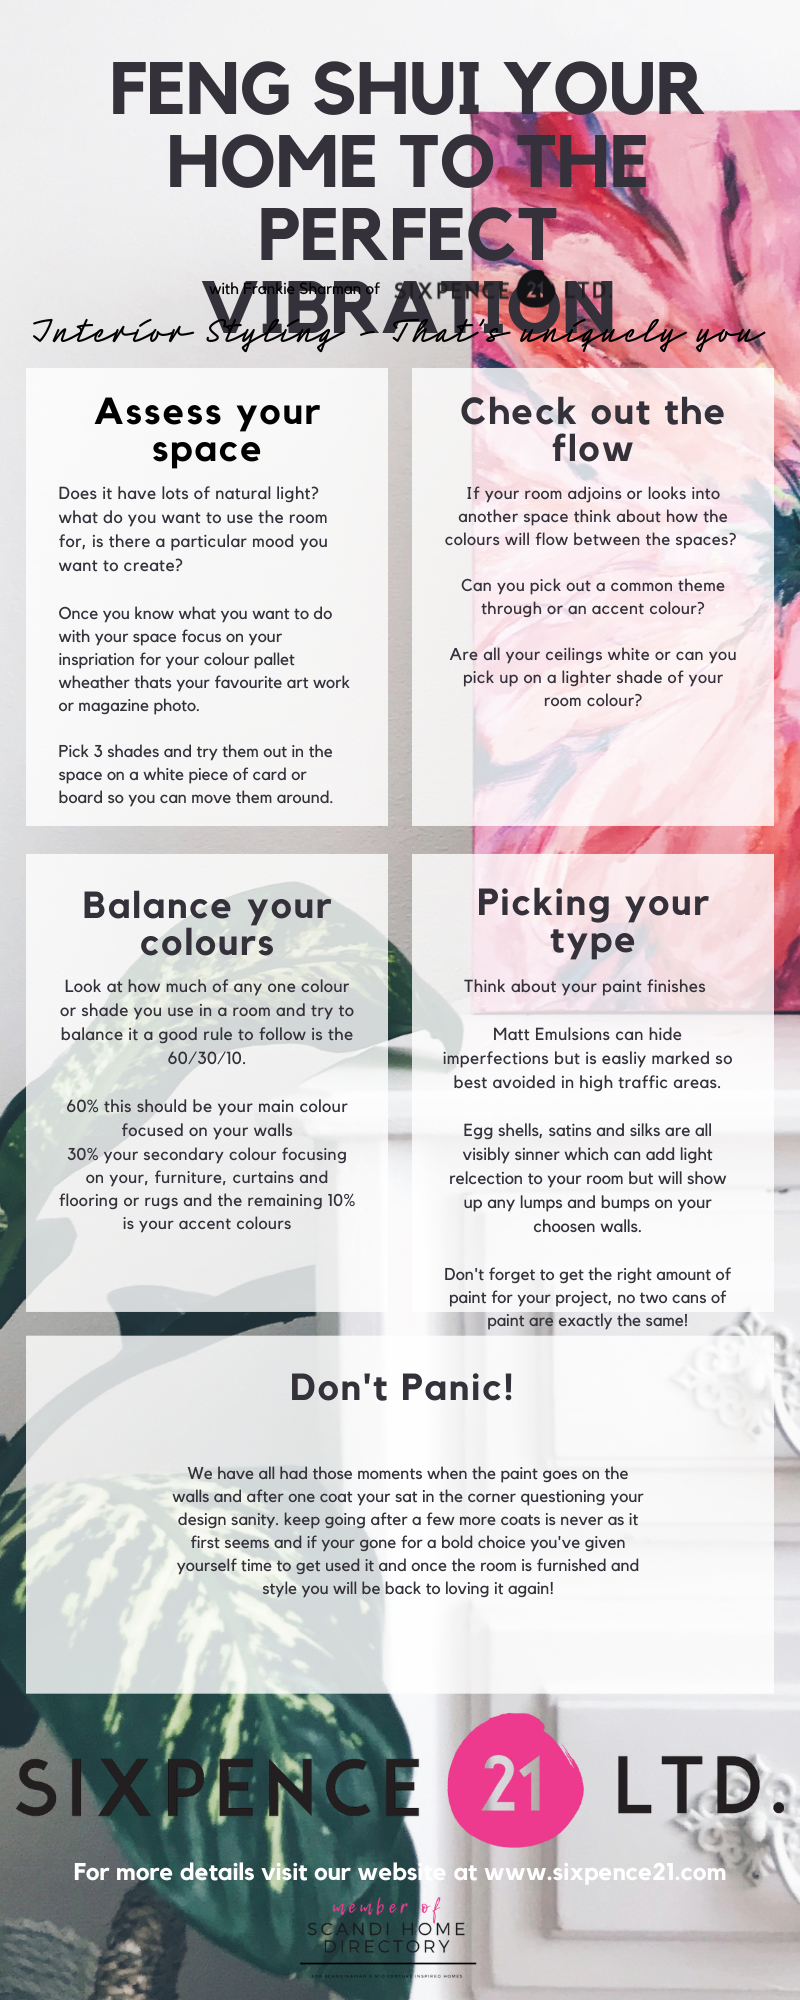 Copy of choosing the perfect paint colour.png